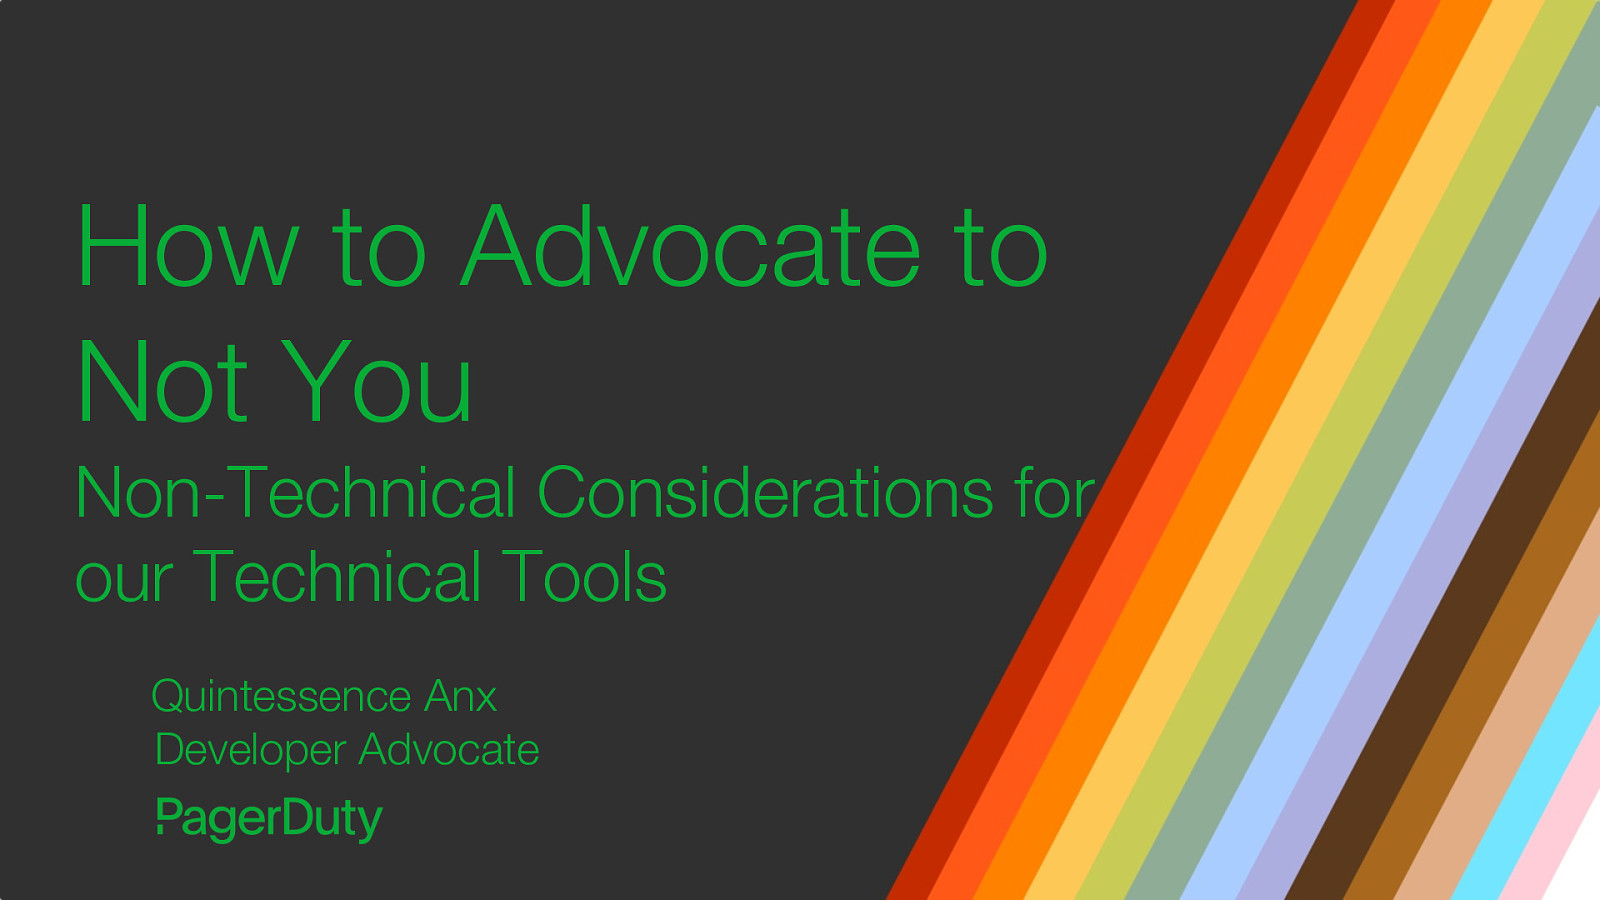 How to Advocate to Not You: Non-Technical Considerations for our Technical Tools